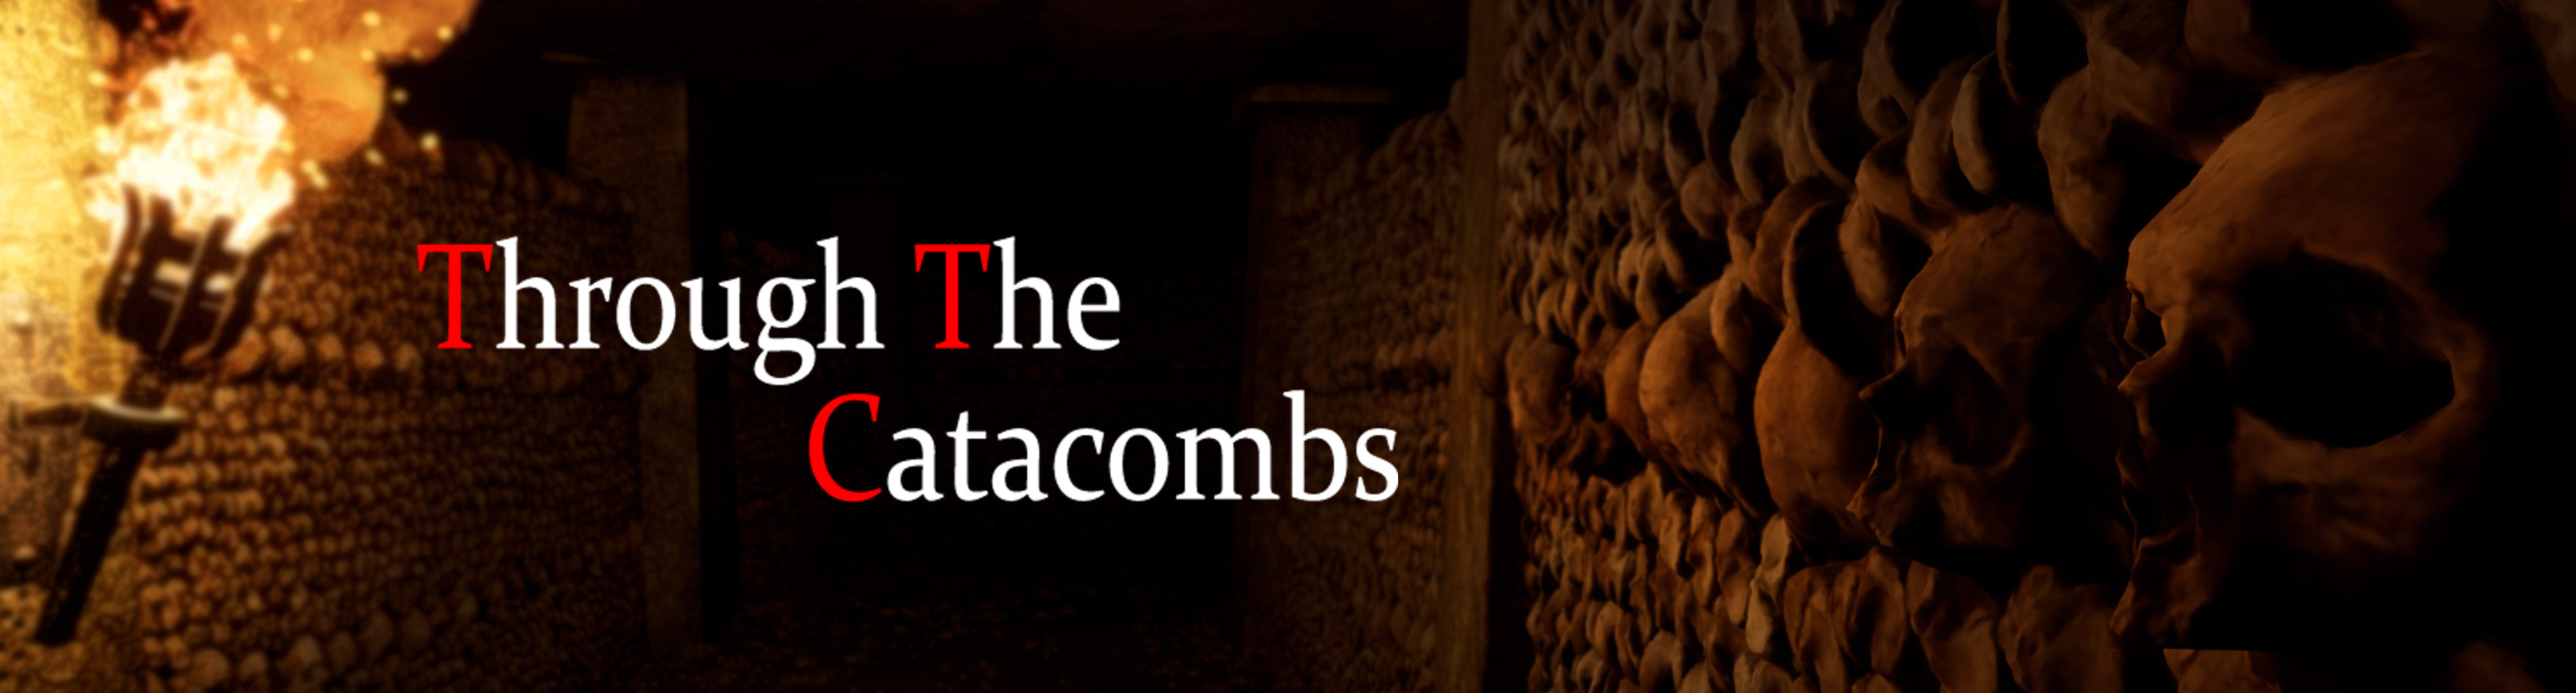 Through the Catacombs